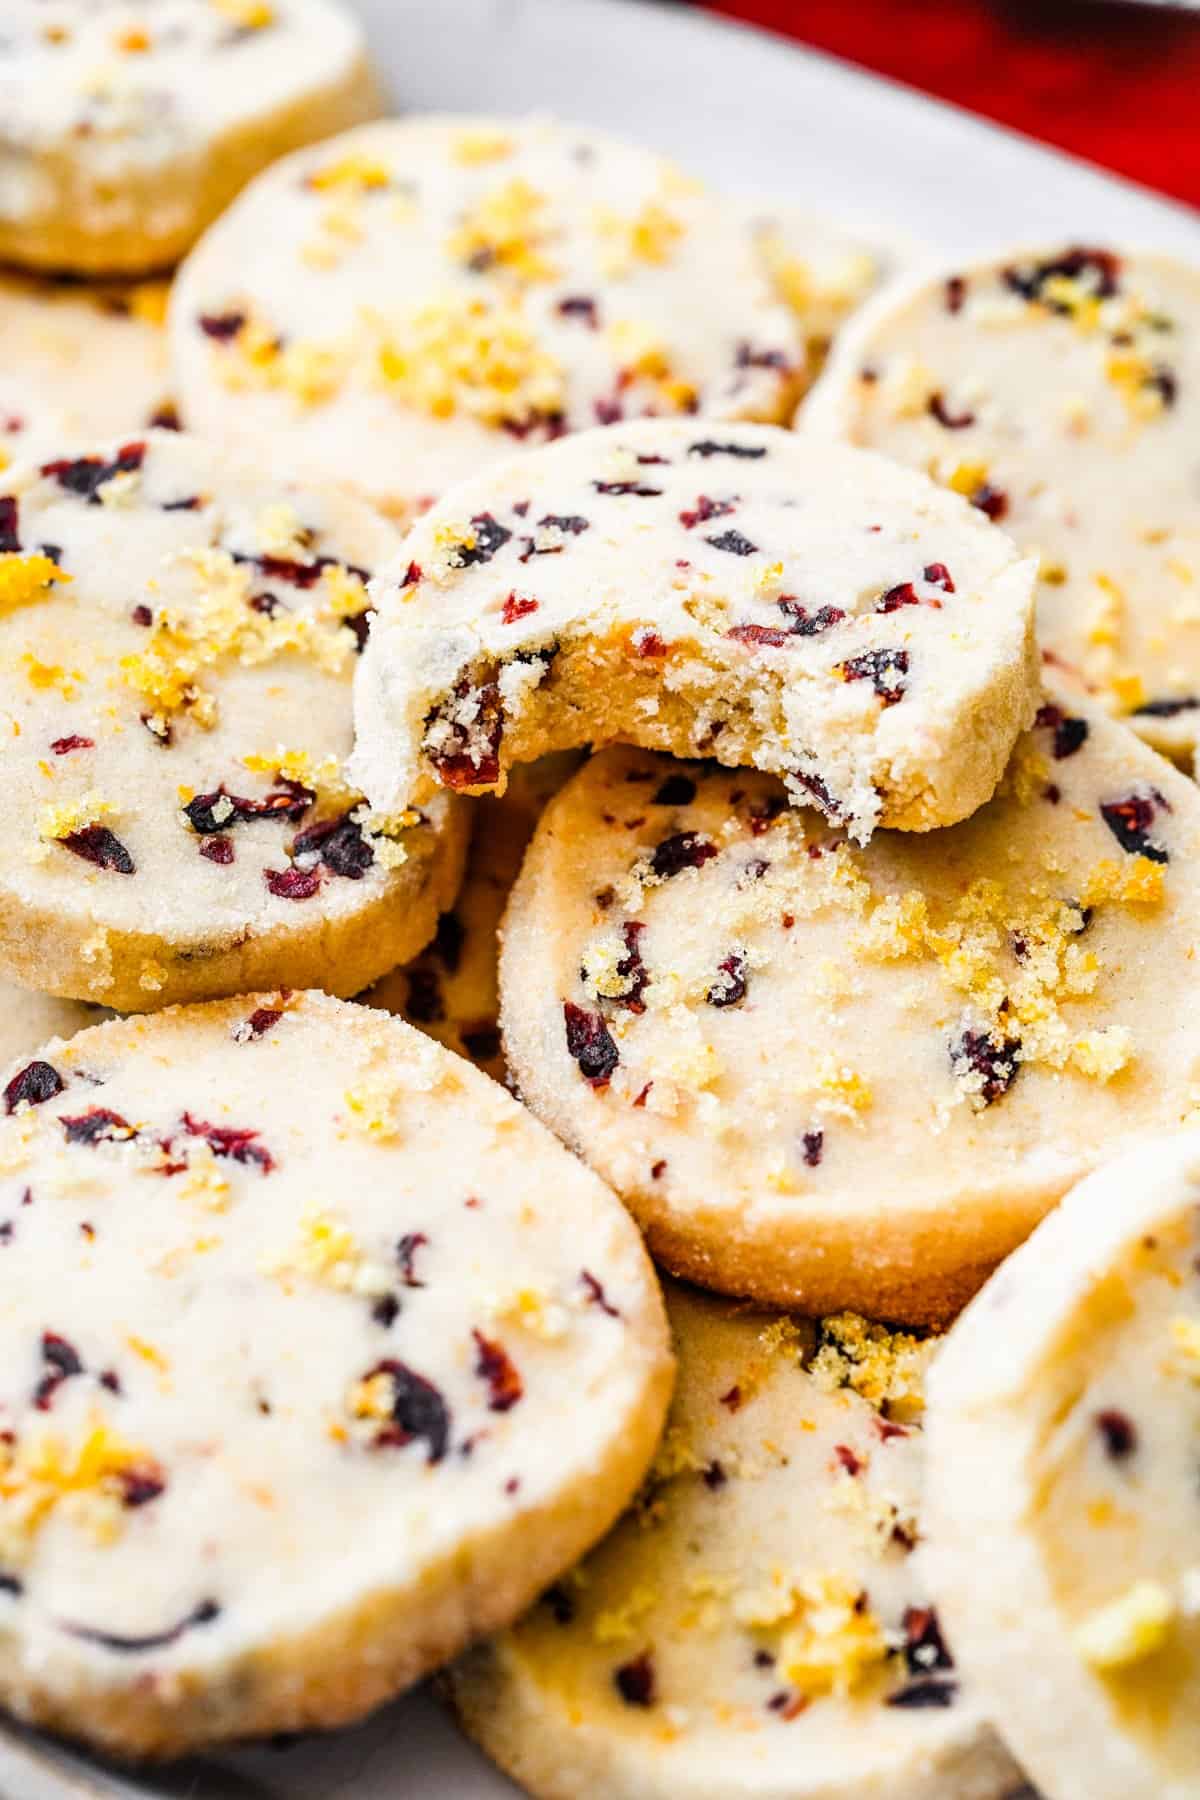 Cranberry shortbread cookies with a bite taken out.